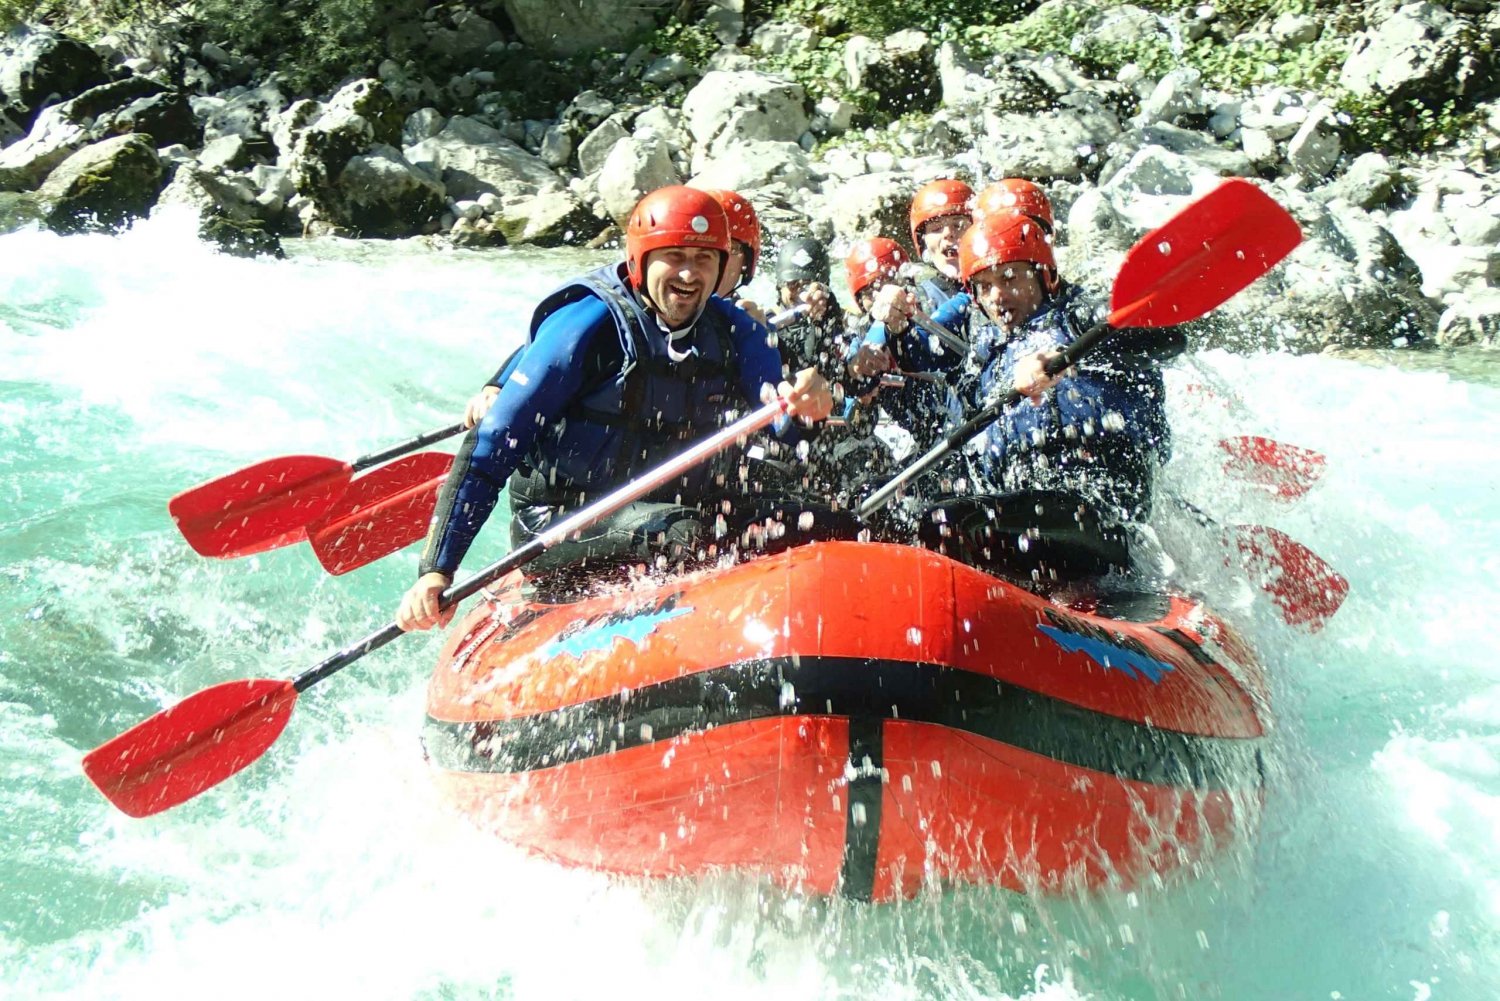 From Bovec: 3.5-Hour Rafting on Soča River